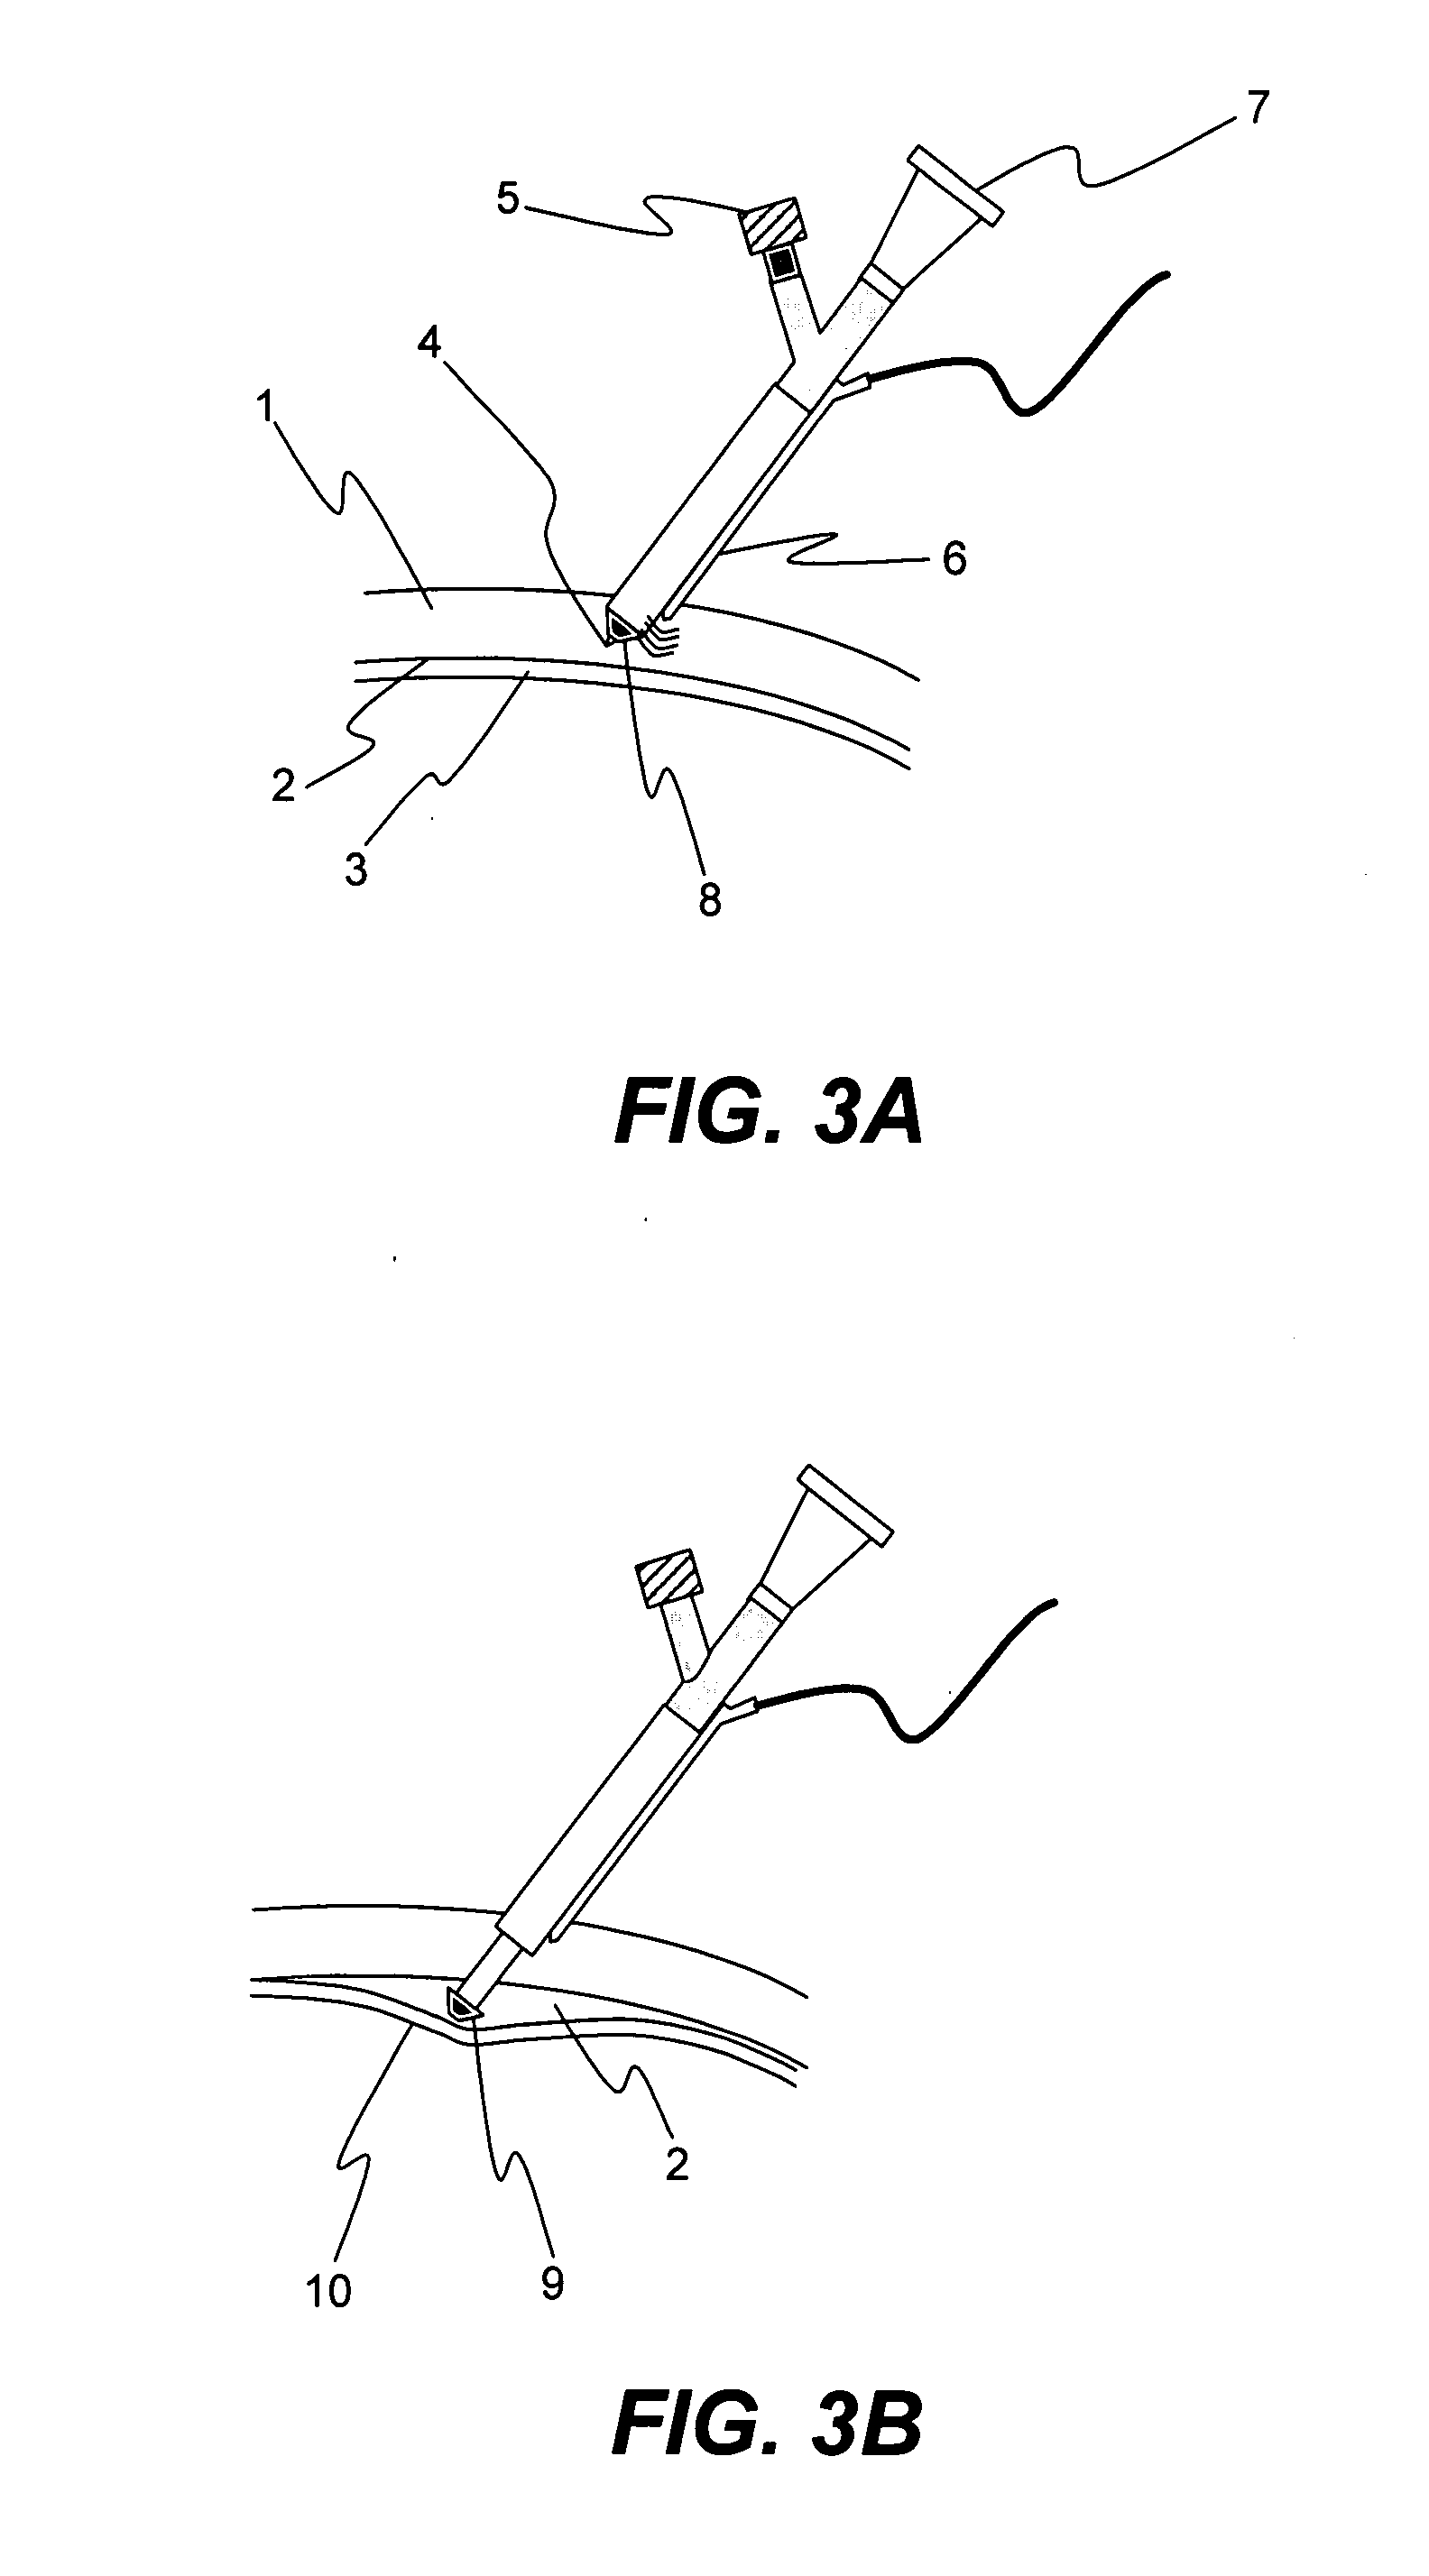 Apparatus and formulations for suprachoroidal drug delivery